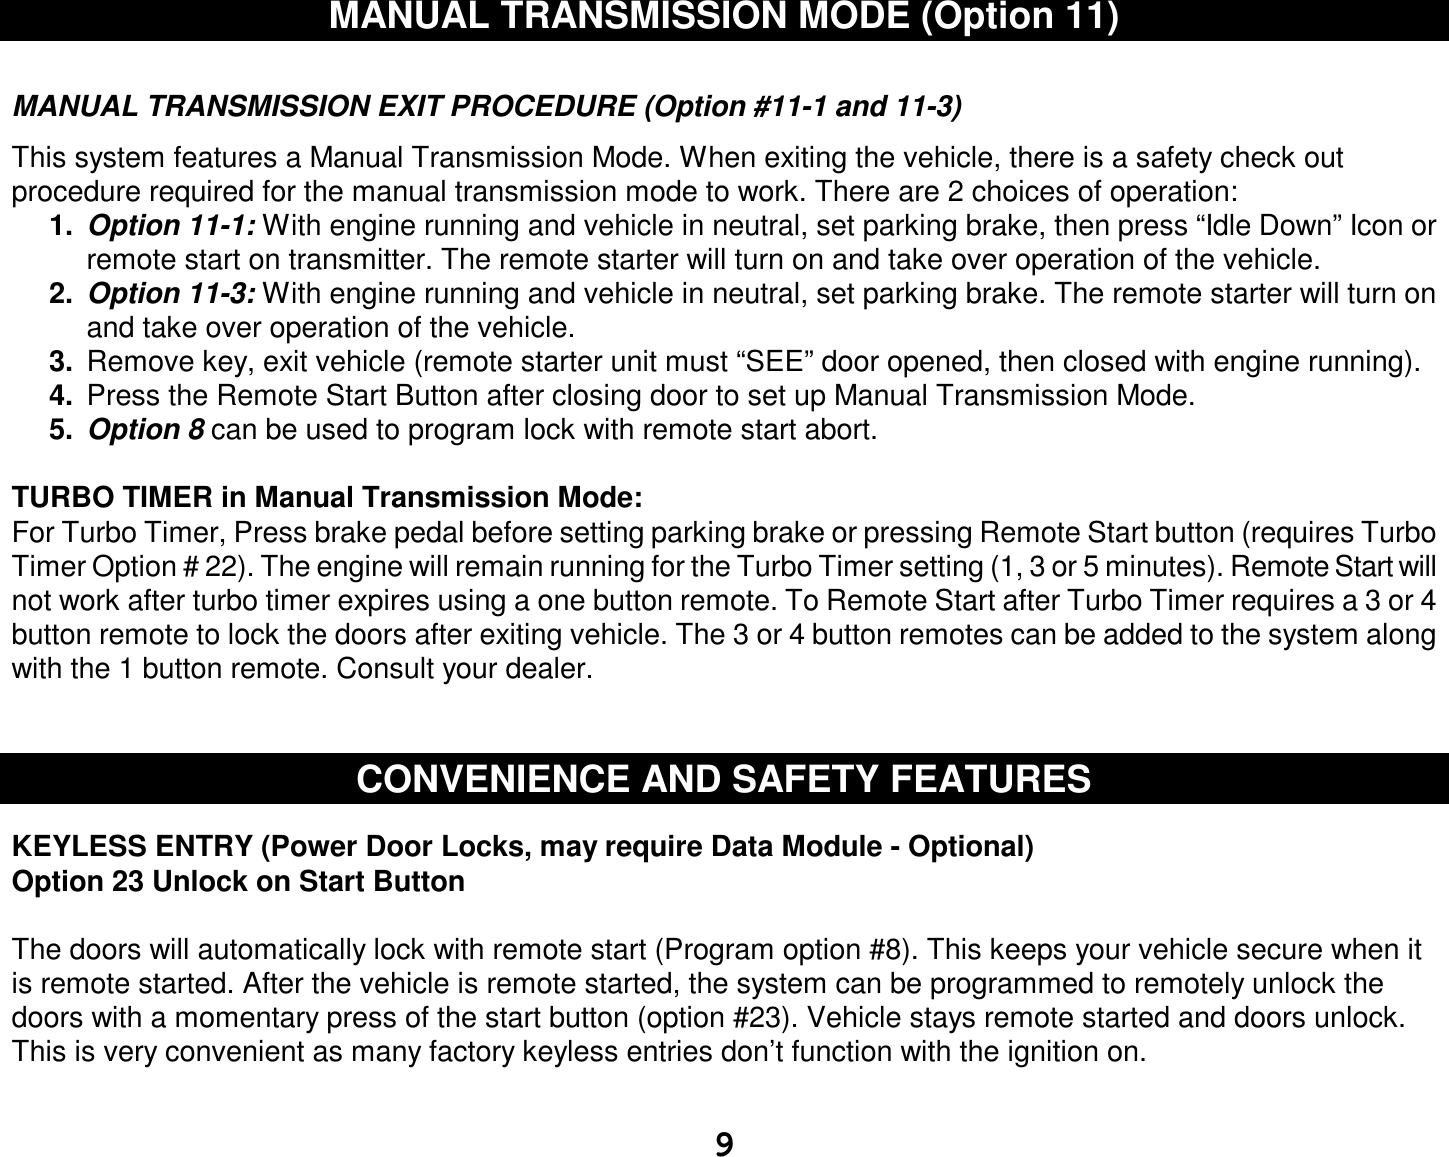  9 MANUAL TRANSMISSION MODE (Option 11)   MANUAL TRANSMISSION EXIT PROCEDURE (Option #11-1 and 11-3)  This system features a Manual Transmission Mode. When exiting the vehicle, there is a safety check out procedure required for the manual transmission mode to work. There are 2 choices of operation:  1.  Option 11-1: With engine running and vehicle in neutral, set parking brake, then press “Idle Down” Icon or remote start on transmitter. The remote starter will turn on and take over operation of the vehicle. 2.  Option 11-3: With engine running and vehicle in neutral, set parking brake. The remote starter will turn on and take over operation of the vehicle. 3.  Remove key, exit vehicle (remote starter unit must “SEE” door opened, then closed with engine running). 4.  Press the Remote Start Button after closing door to set up Manual Transmission Mode.  5.  Option 8 can be used to program lock with remote start abort.  TURBO TIMER in Manual Transmission Mode: For Turbo Timer, Press brake pedal before setting parking brake or pressing Remote Start button (requires Turbo Timer Option # 22). The engine will remain running for the Turbo Timer setting (1, 3 or 5 minutes). Remote Start will not work after turbo timer expires using a one button remote. To Remote Start after Turbo Timer requires a 3 or 4 button remote to lock the doors after exiting vehicle. The 3 or 4 button remotes can be added to the system along with the 1 button remote. Consult your dealer.   CONVENIENCE AND SAFETY FEATURES   KEYLESS ENTRY (Power Door Locks, may require Data Module - Optional)  Option 23 Unlock on Start Button  The doors will automatically lock with remote start (Program option #8). This keeps your vehicle secure when it is remote started. After the vehicle is remote started, the system can be programmed to remotely unlock the doors with a momentary press of the start button (option #23). Vehicle stays remote started and doors unlock. This is very convenient as many factory keyless entries don’t function with the ignition on.  